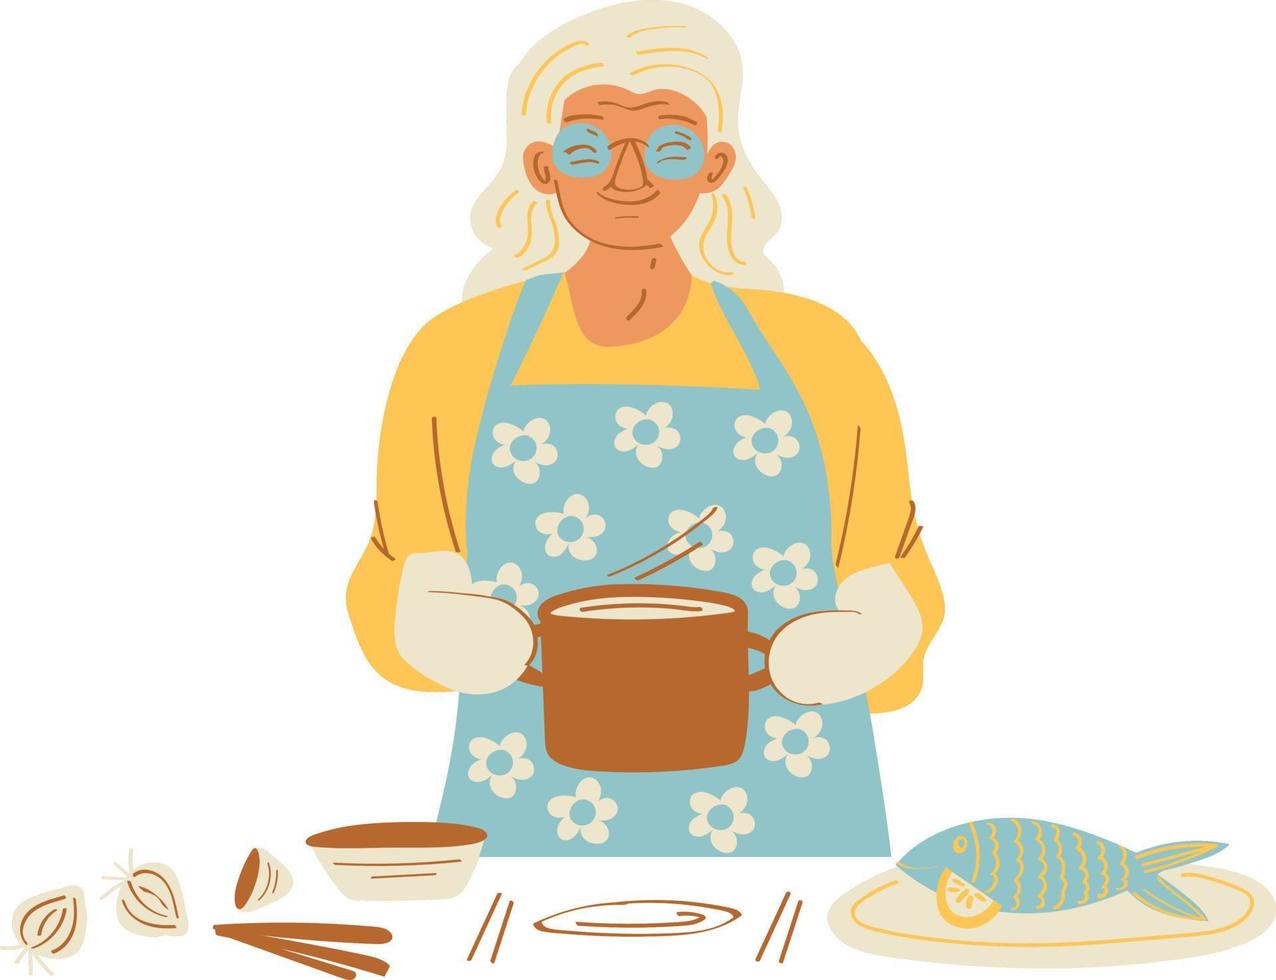 Elderly woman cooking in the kitchen. Flat vector illustration.